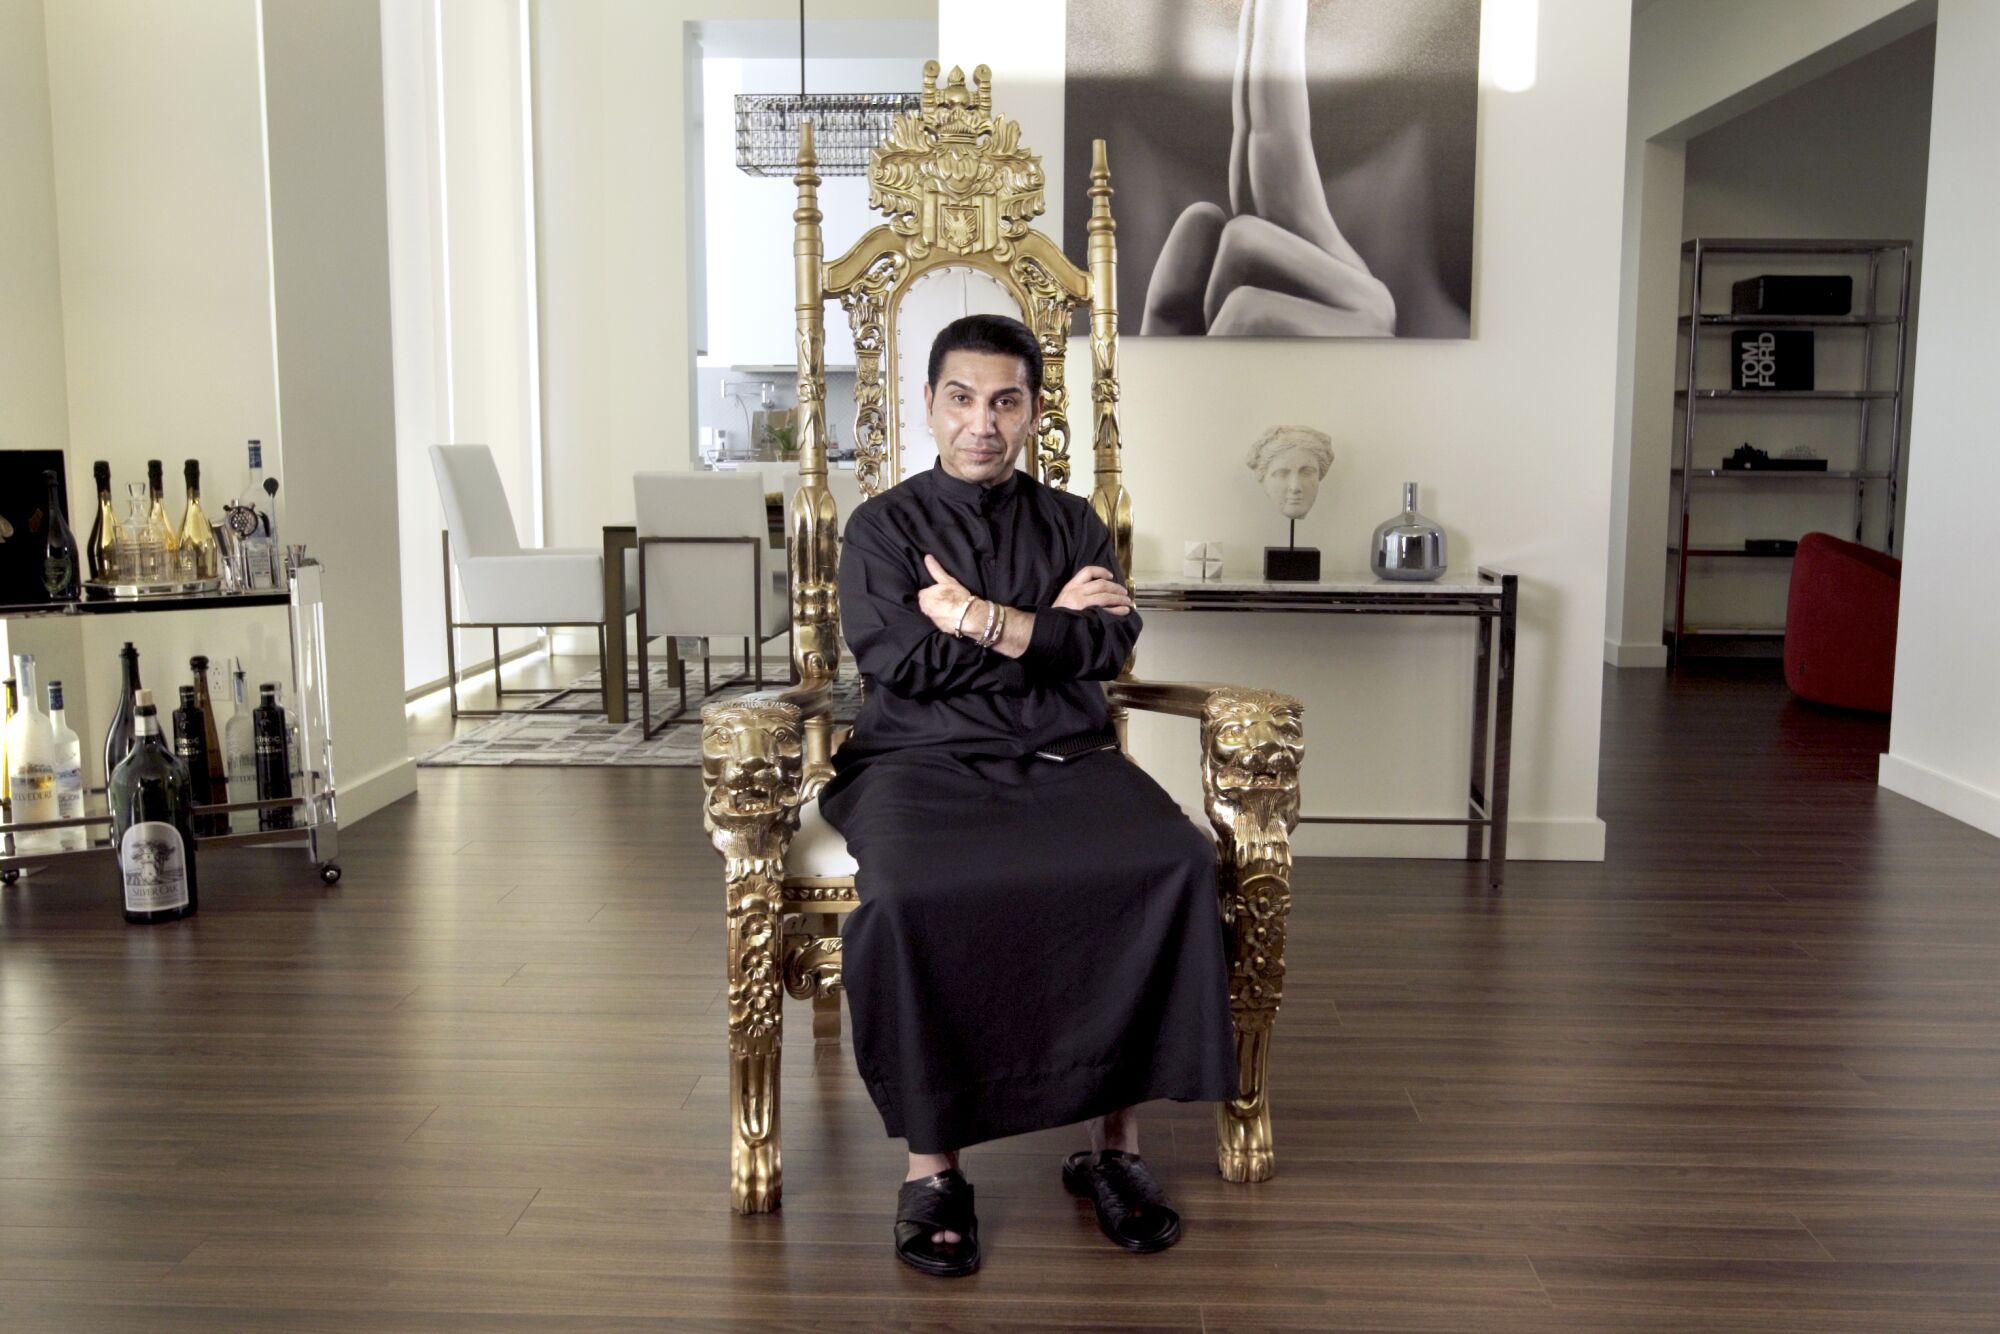 Fereidoun "Prince Fred" Khalilian sits on a gold chair wearing a dark dish dash, arms crossed, looking at the camera smiling